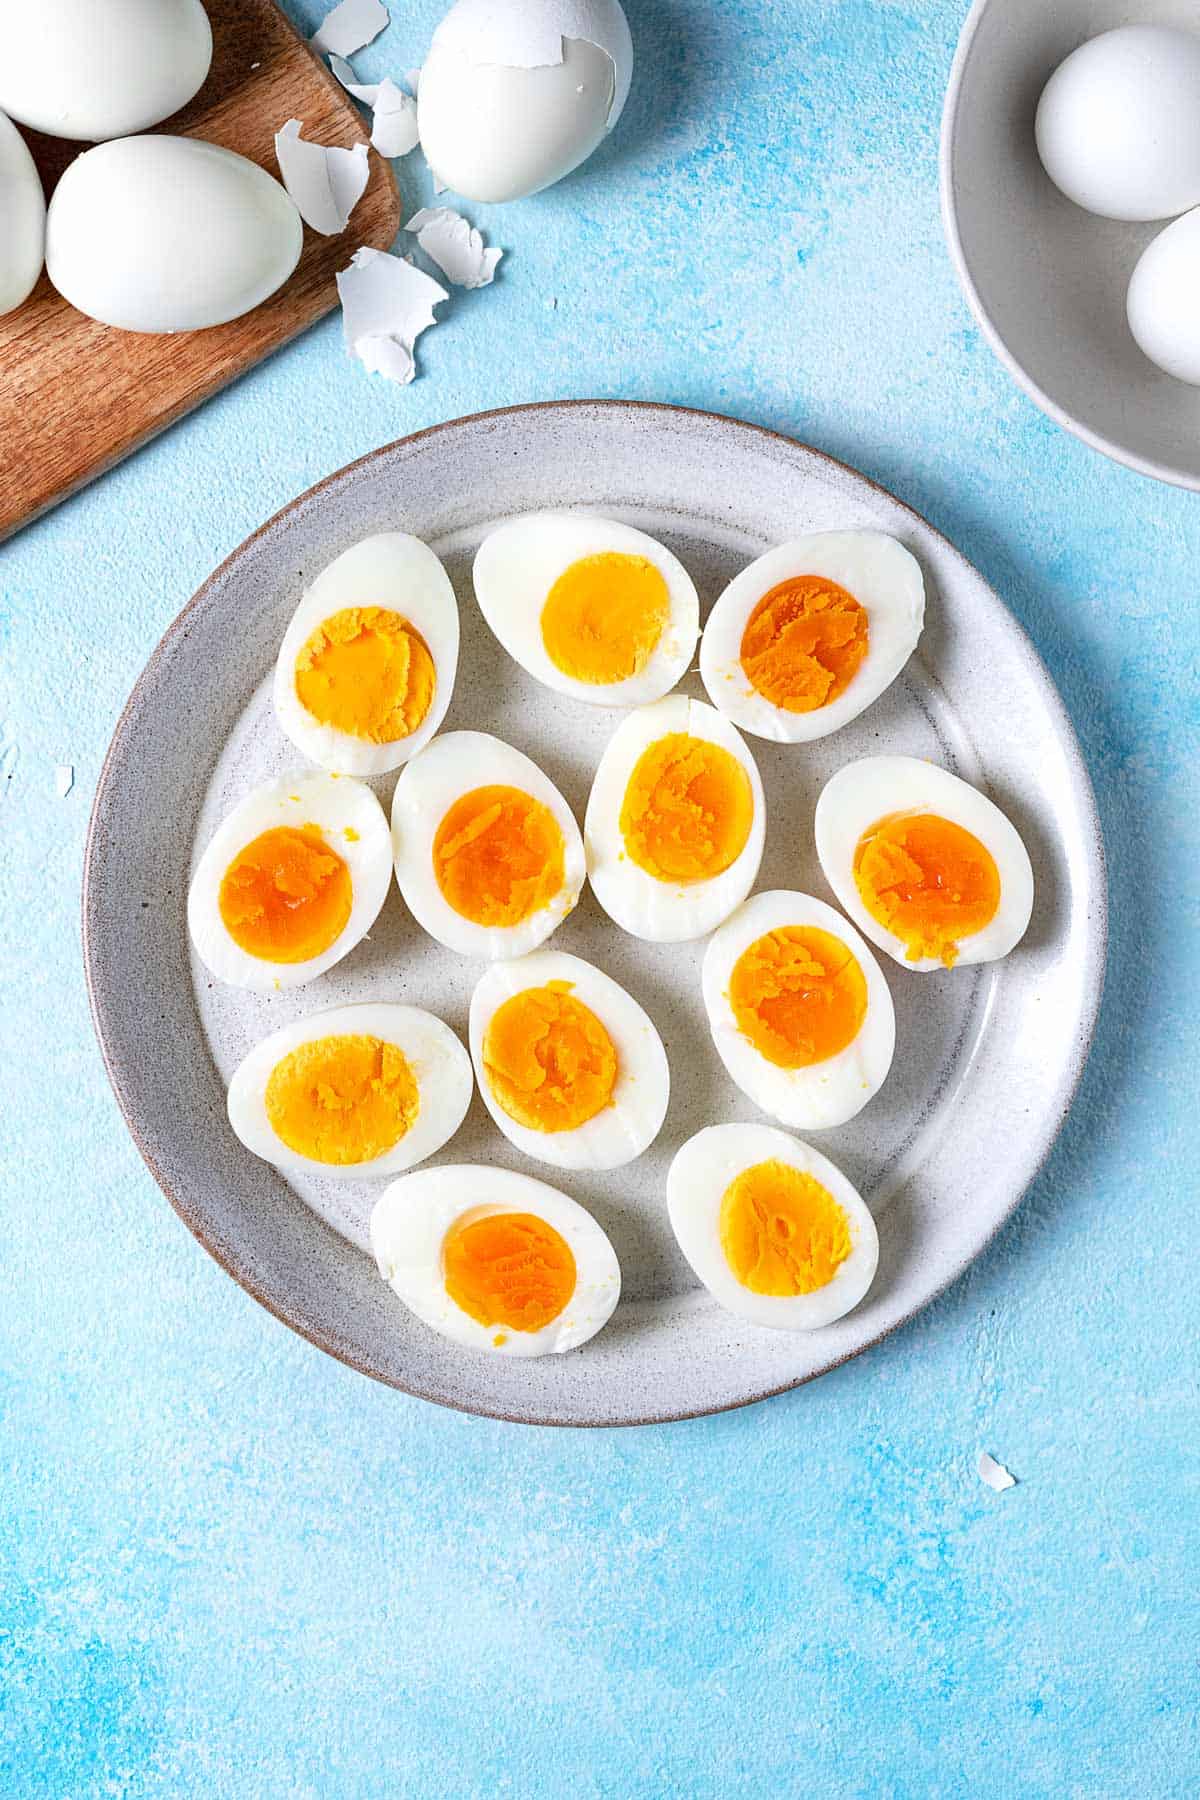 How To Make Soft-Boiled Eggs - Once Upon a Chef